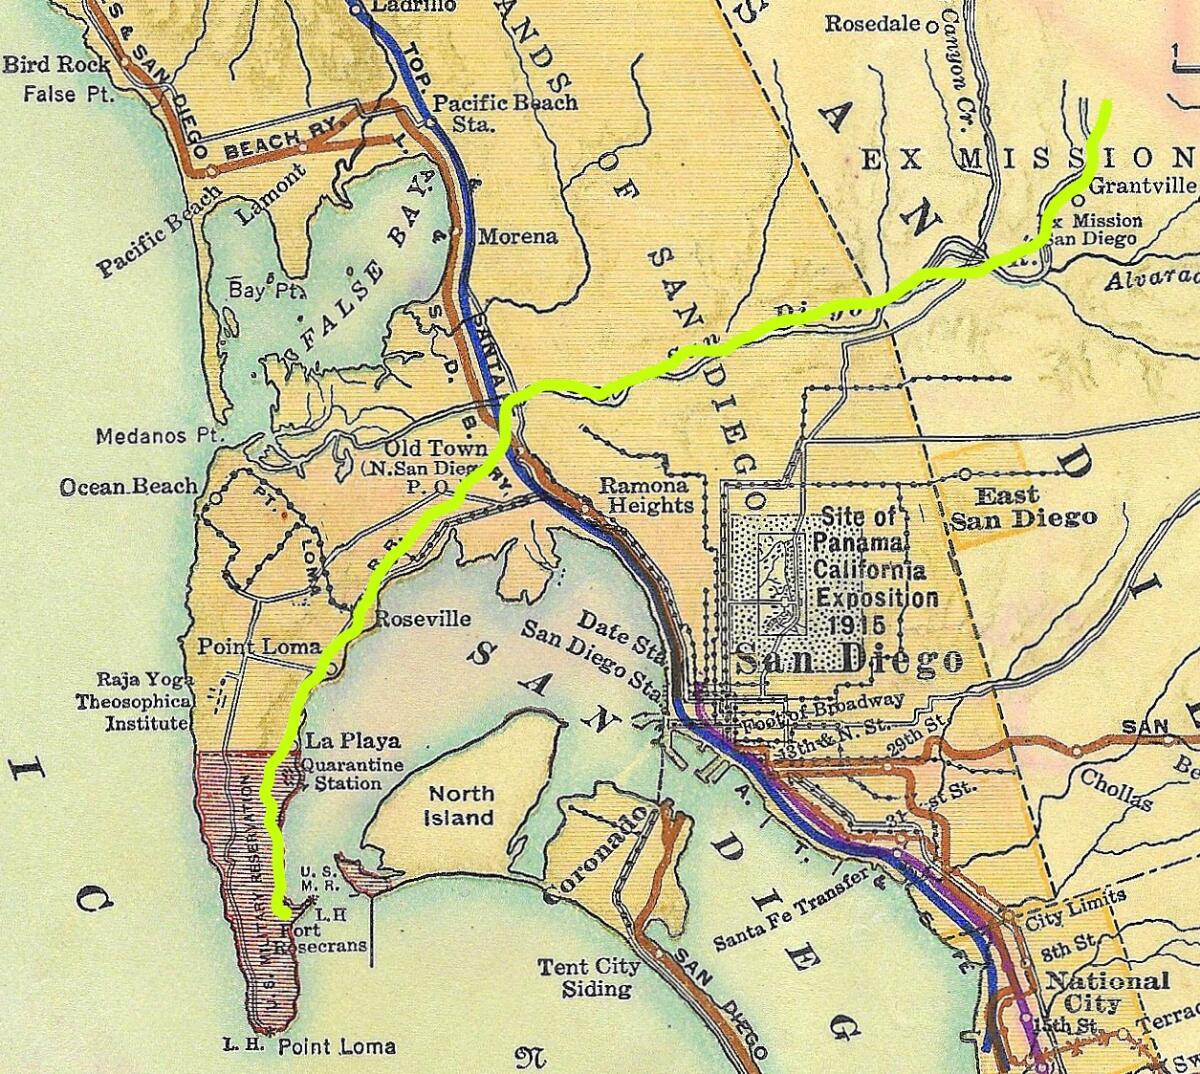 The approximate route of the La Playa Trail (in yellow), indicated on a 1915 railroad map.